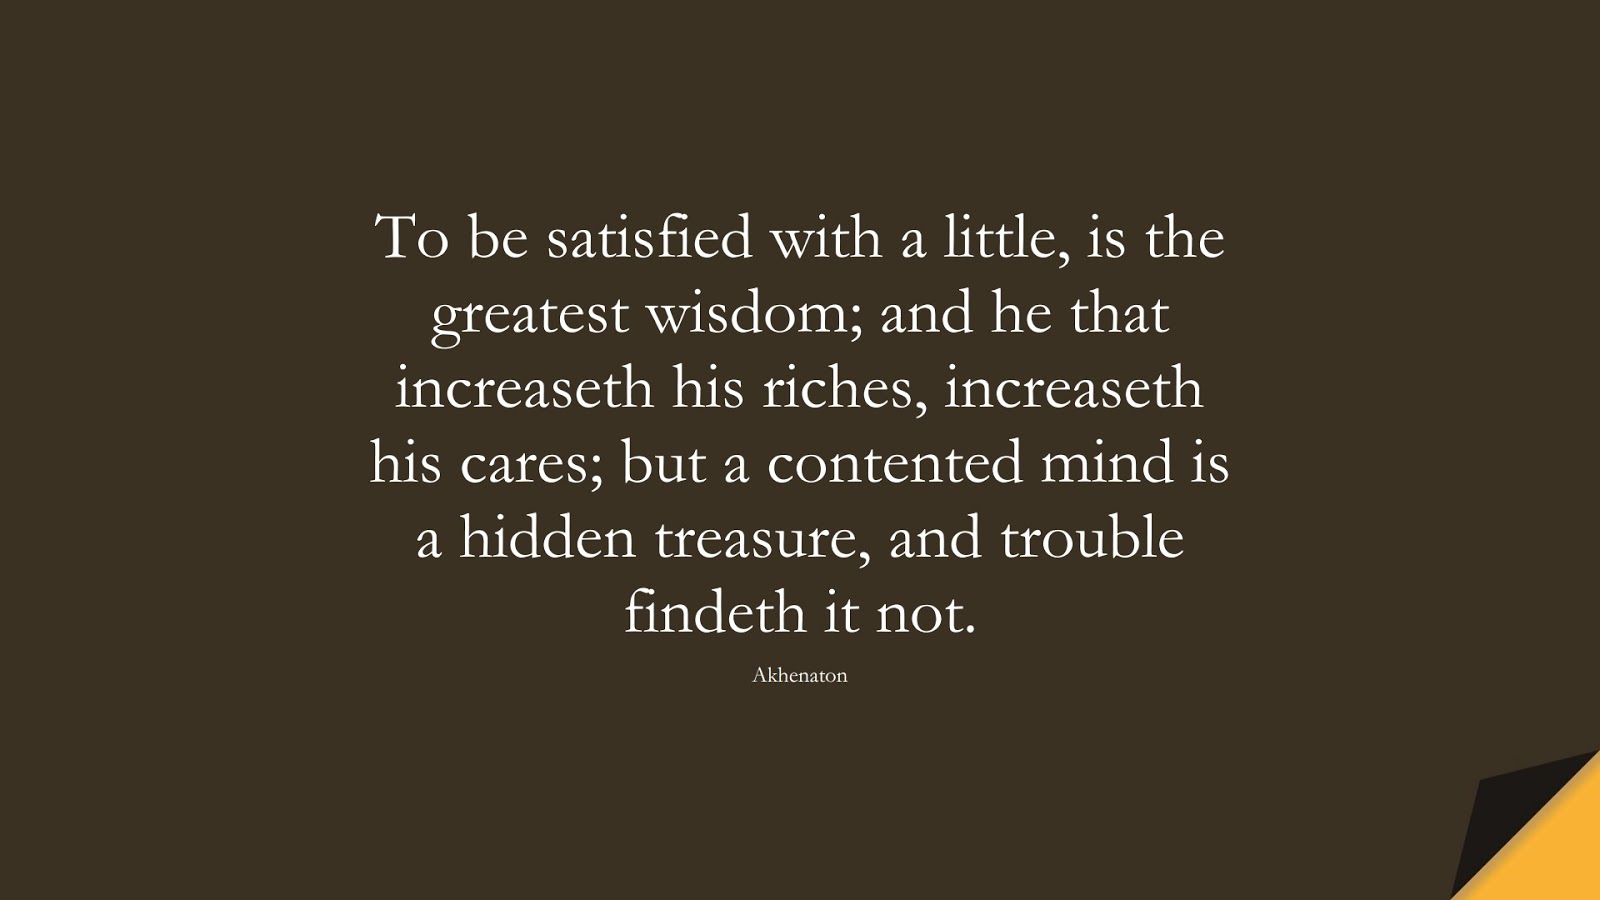 To be satisfied with a little, is the greatest wisdom; and he that increaseth his riches, increaseth his cares; but a contented mind is a hidden treasure, and trouble findeth it not. (Akhenaton);  #WordsofWisdom